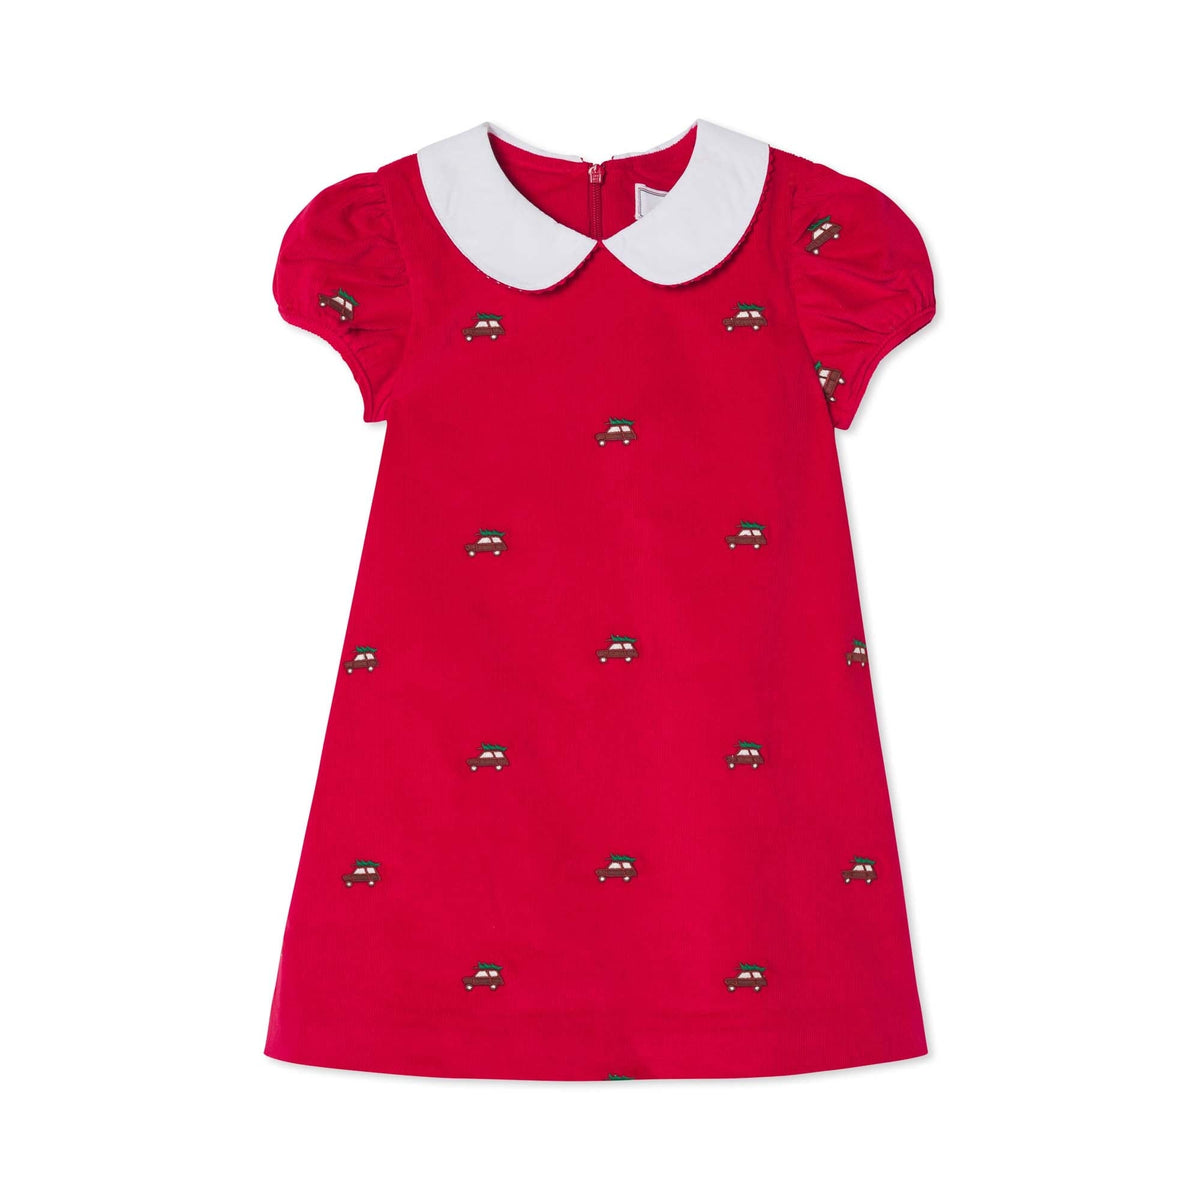 Classic and Preppy Paige Dress, Crimson with Woody Embroidered-Dresses, Jumpsuits and Rompers-Crimson with Woody Embroidered-6-9M-CPC - Classic Prep Childrenswear